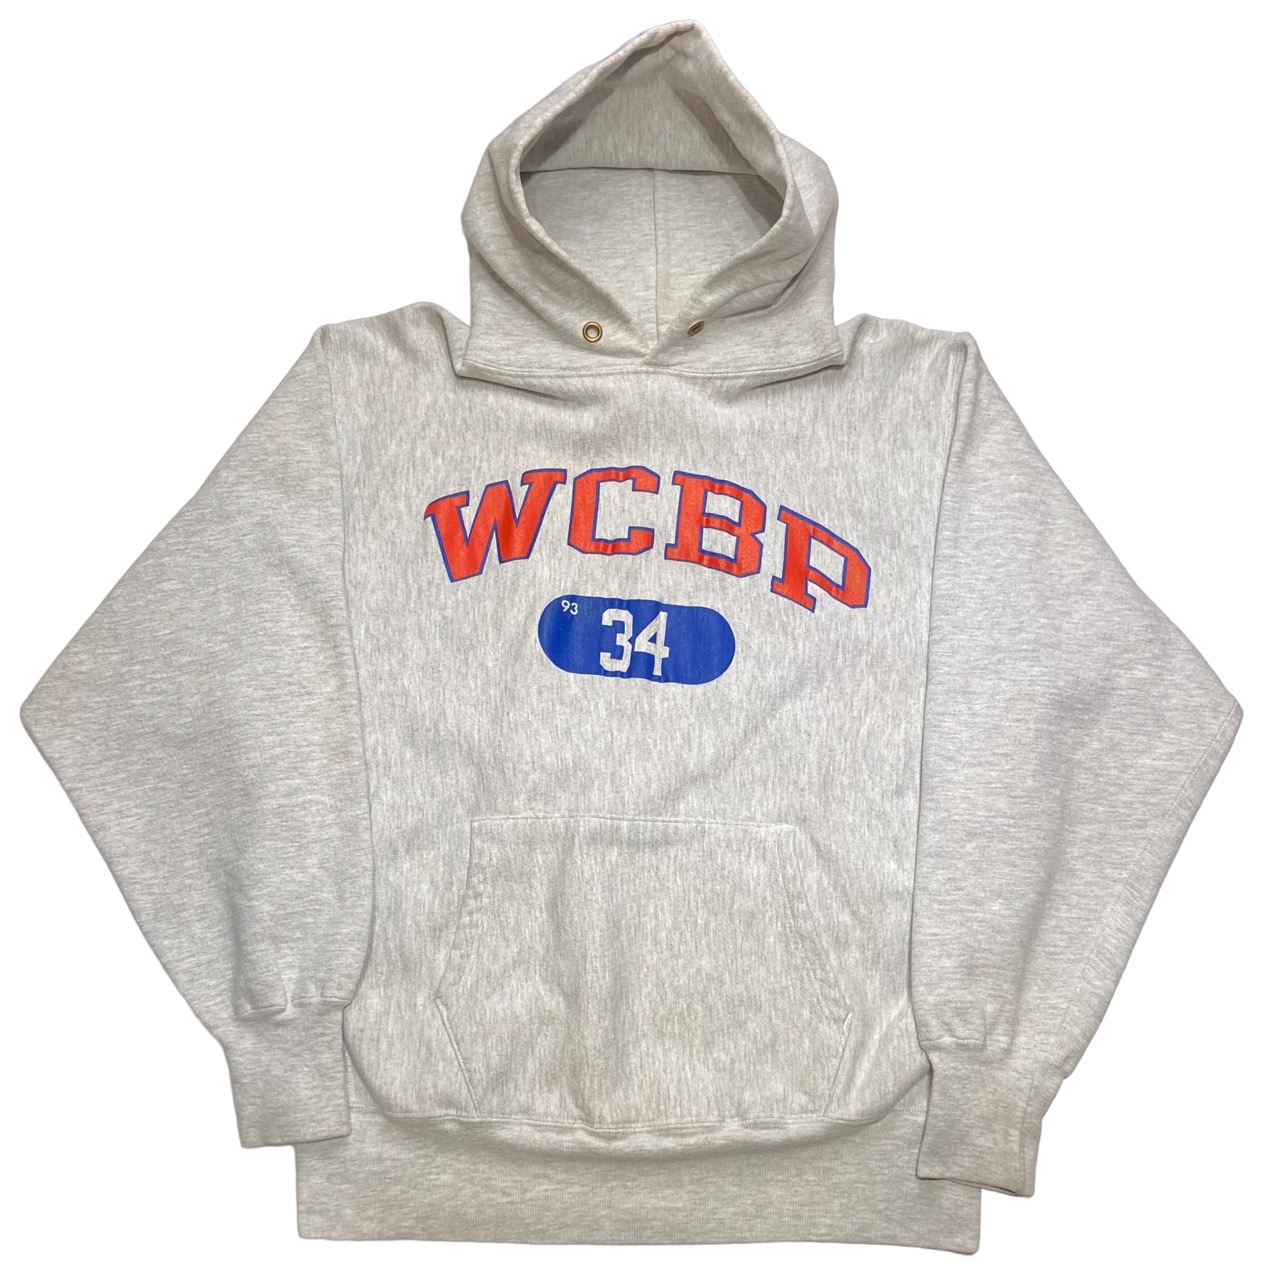 90s Champion Reverse Weave Hoodie “二段カプセル” “WCBP” Made in ...